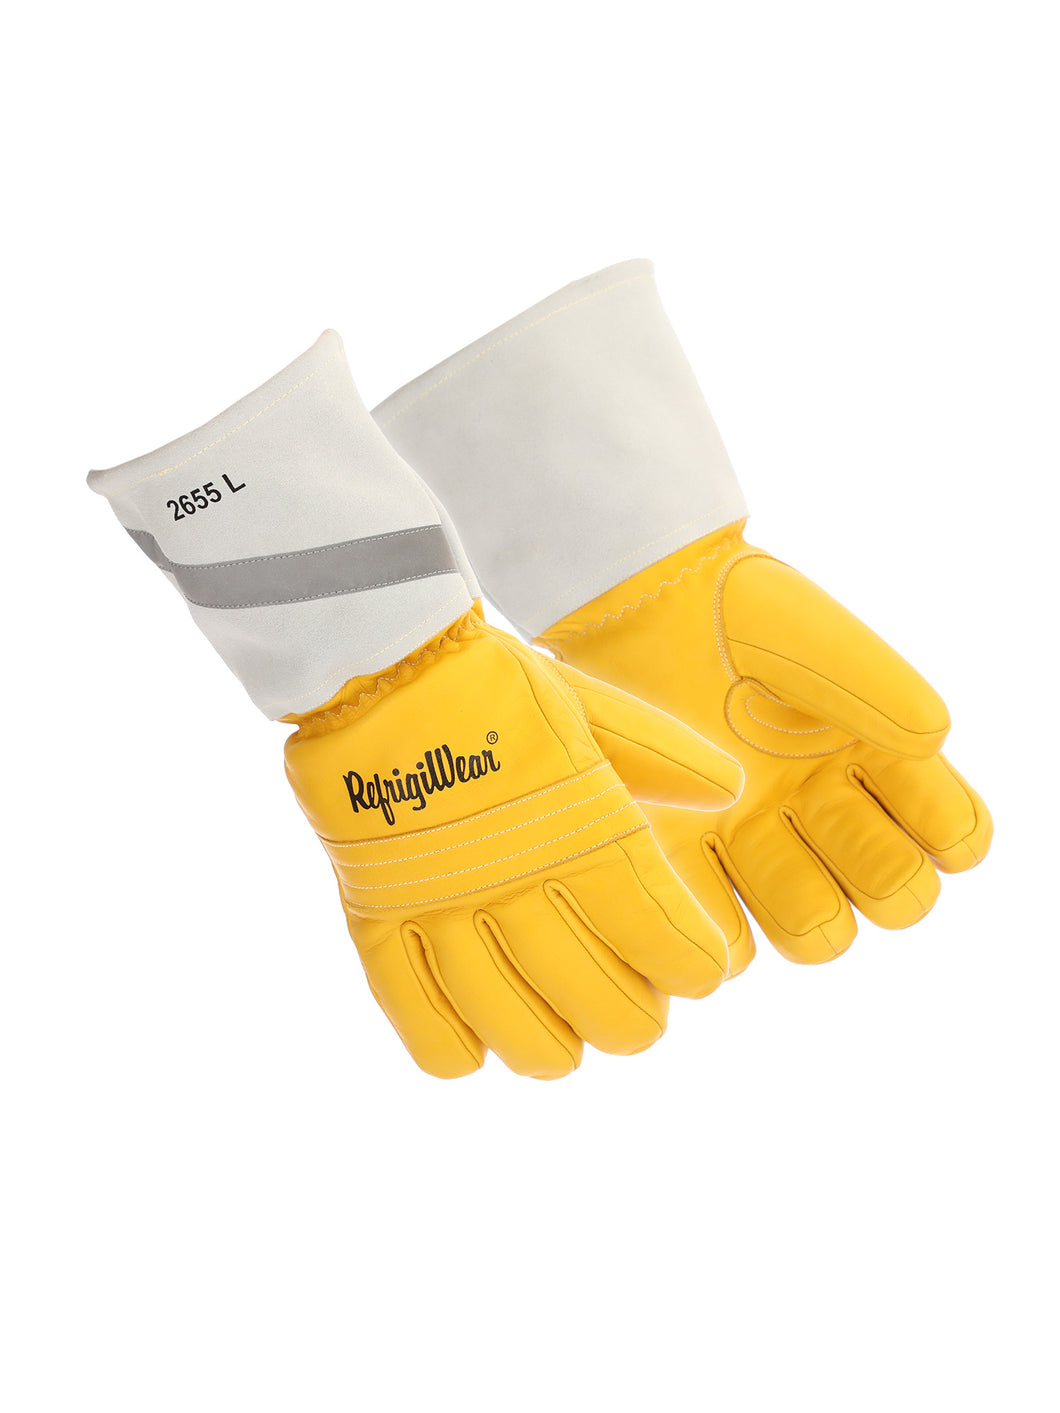 2655 Insulated Water Resistant Cowhide Leather Glove